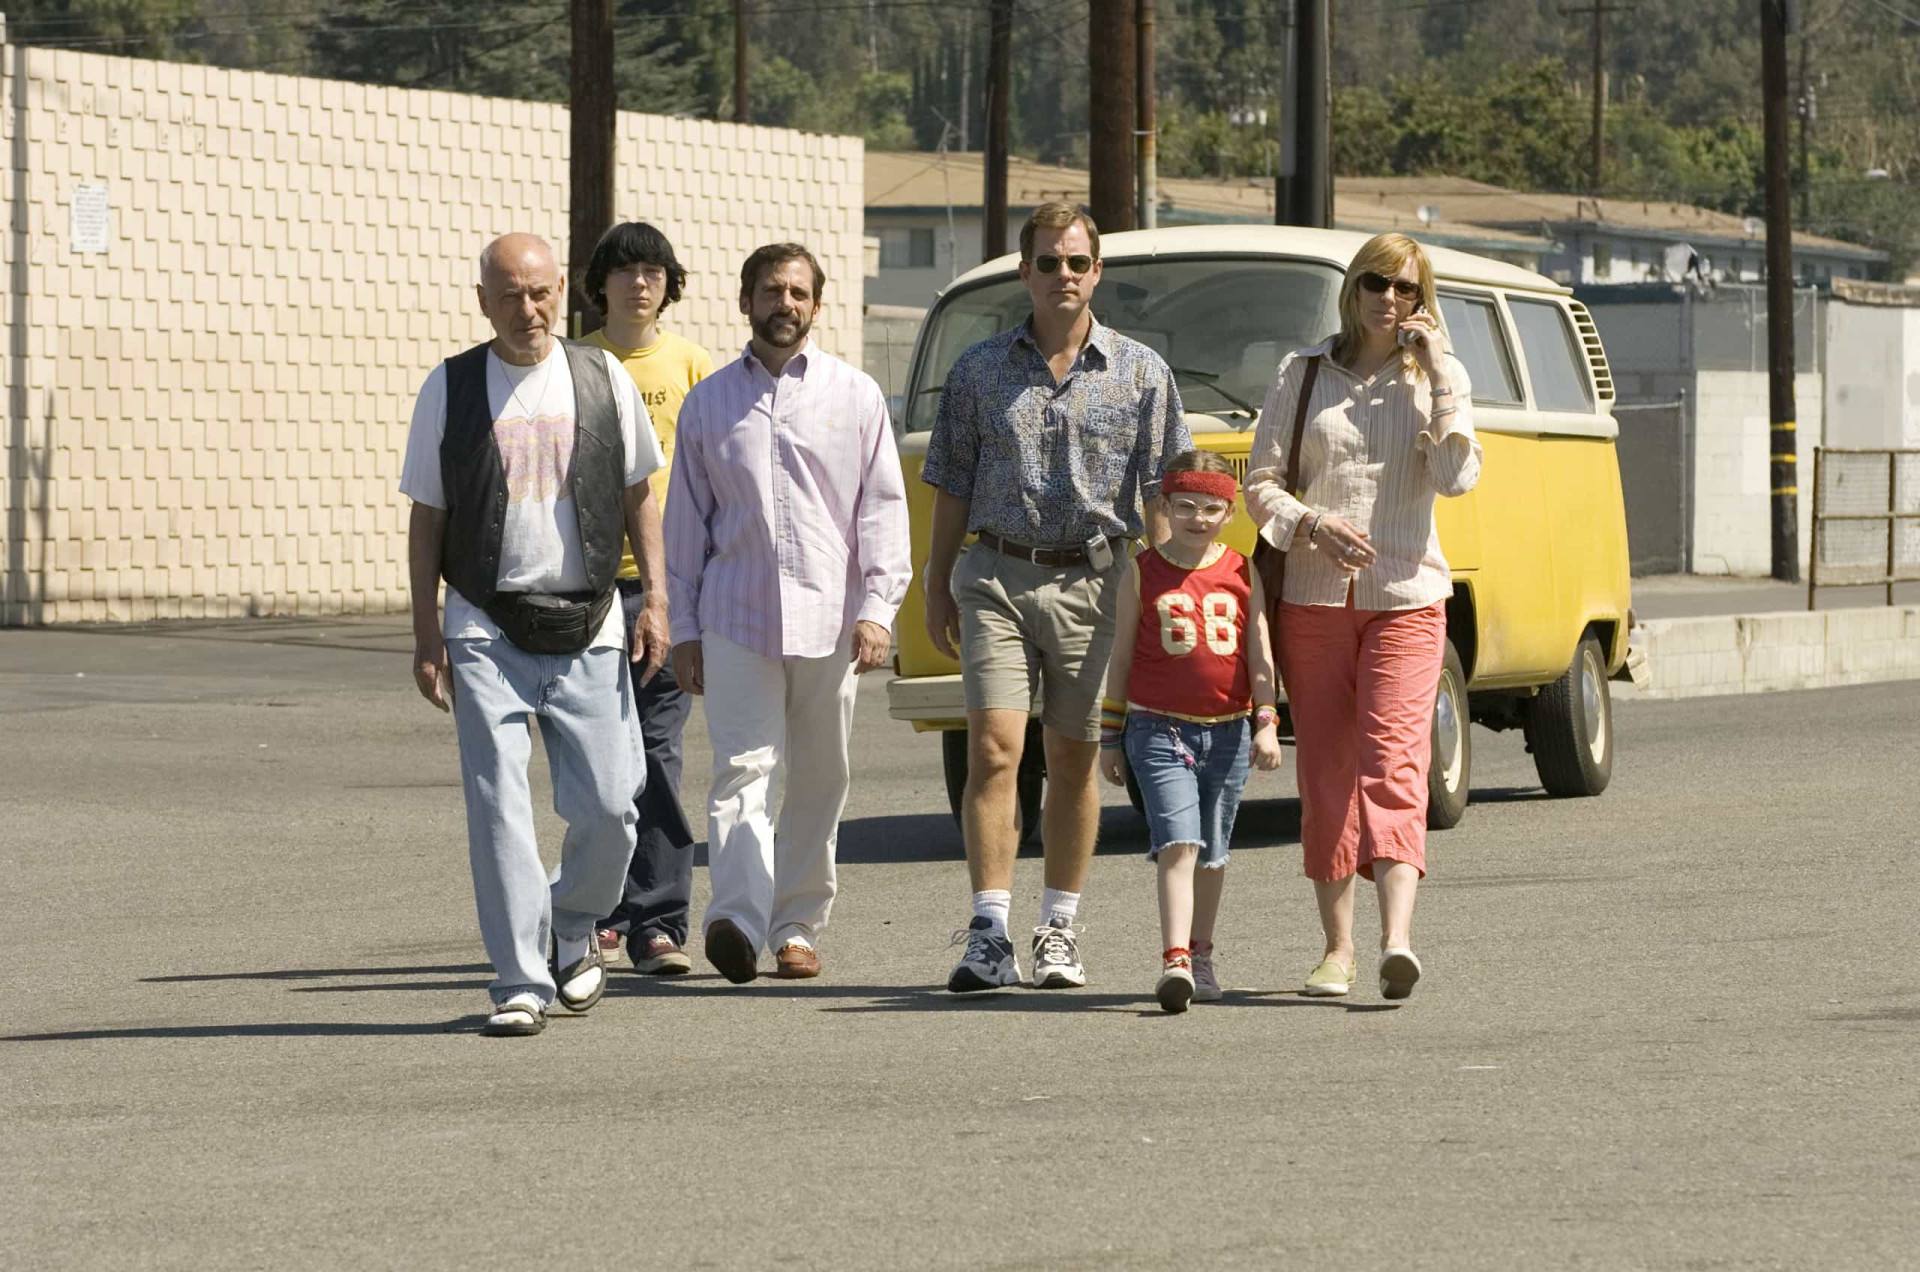 <p>A dysfunctional Albuquerque family hit the road in their Volkswagen van in a bitter-sweet indie movie. The offbeat family are headed to California, where seven-year-old daughter Olive is keen to showcase her somewhat unique dance moves in the finals of a beauty pageant.</p><p><a href="https://www.msn.com/en-us/community/channel/vid-7xx8mnucu55yw63we9va2gwr7uihbxwc68fxqp25x6tg4ftibpra?cvid=94631541bc0f4f89bfd59158d696ad7e">Follow us and access great exclusive content every day</a></p>